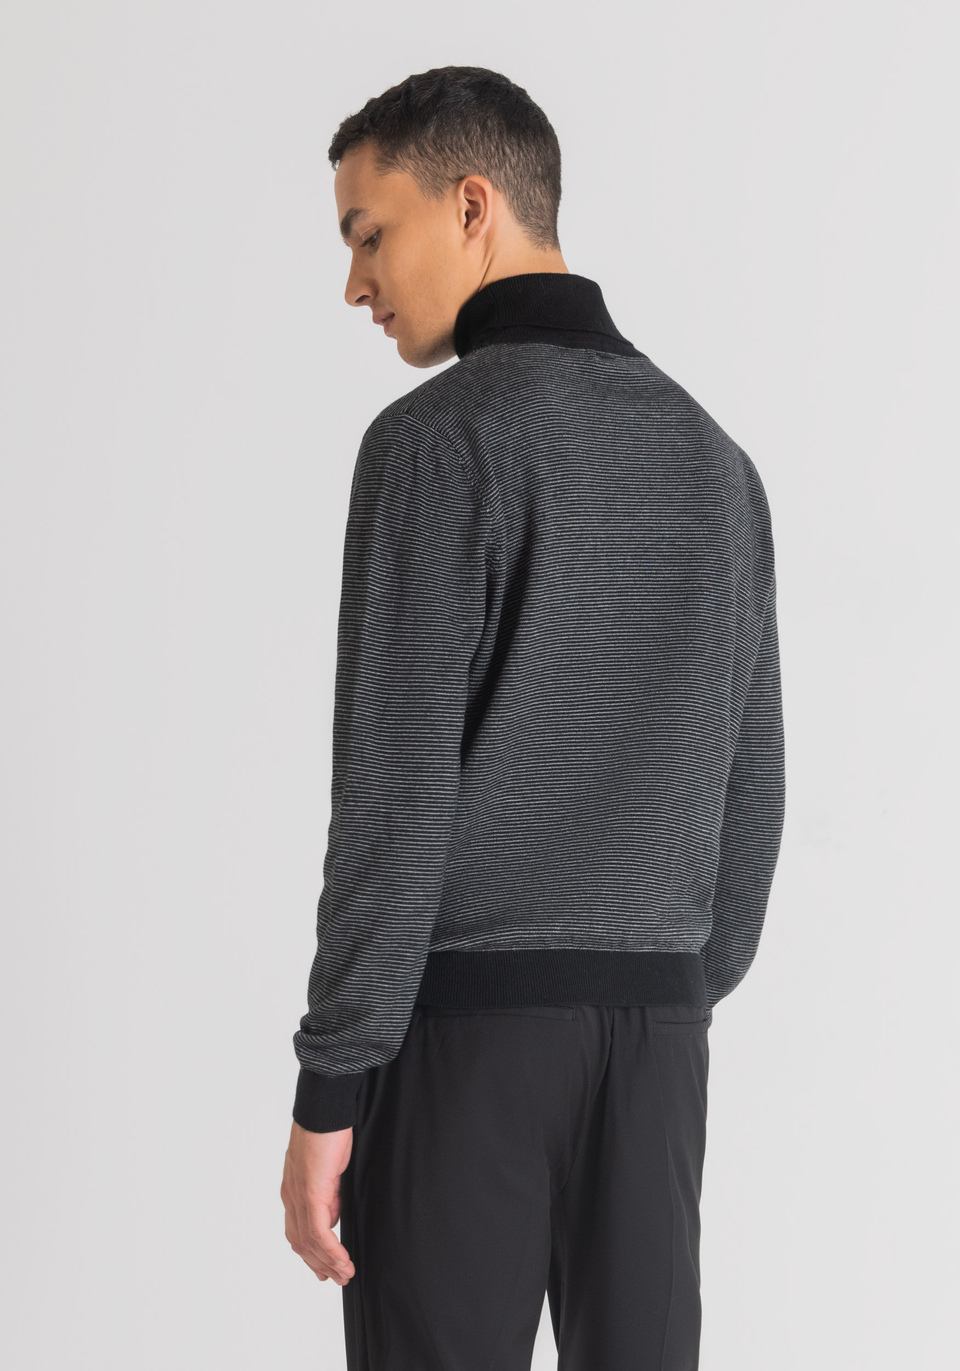 REGULAR FIT SWEATER IN MOHAIR WOOL-BLEND YARN WITH STRIPED PATTERN - Antony Morato Online Shop